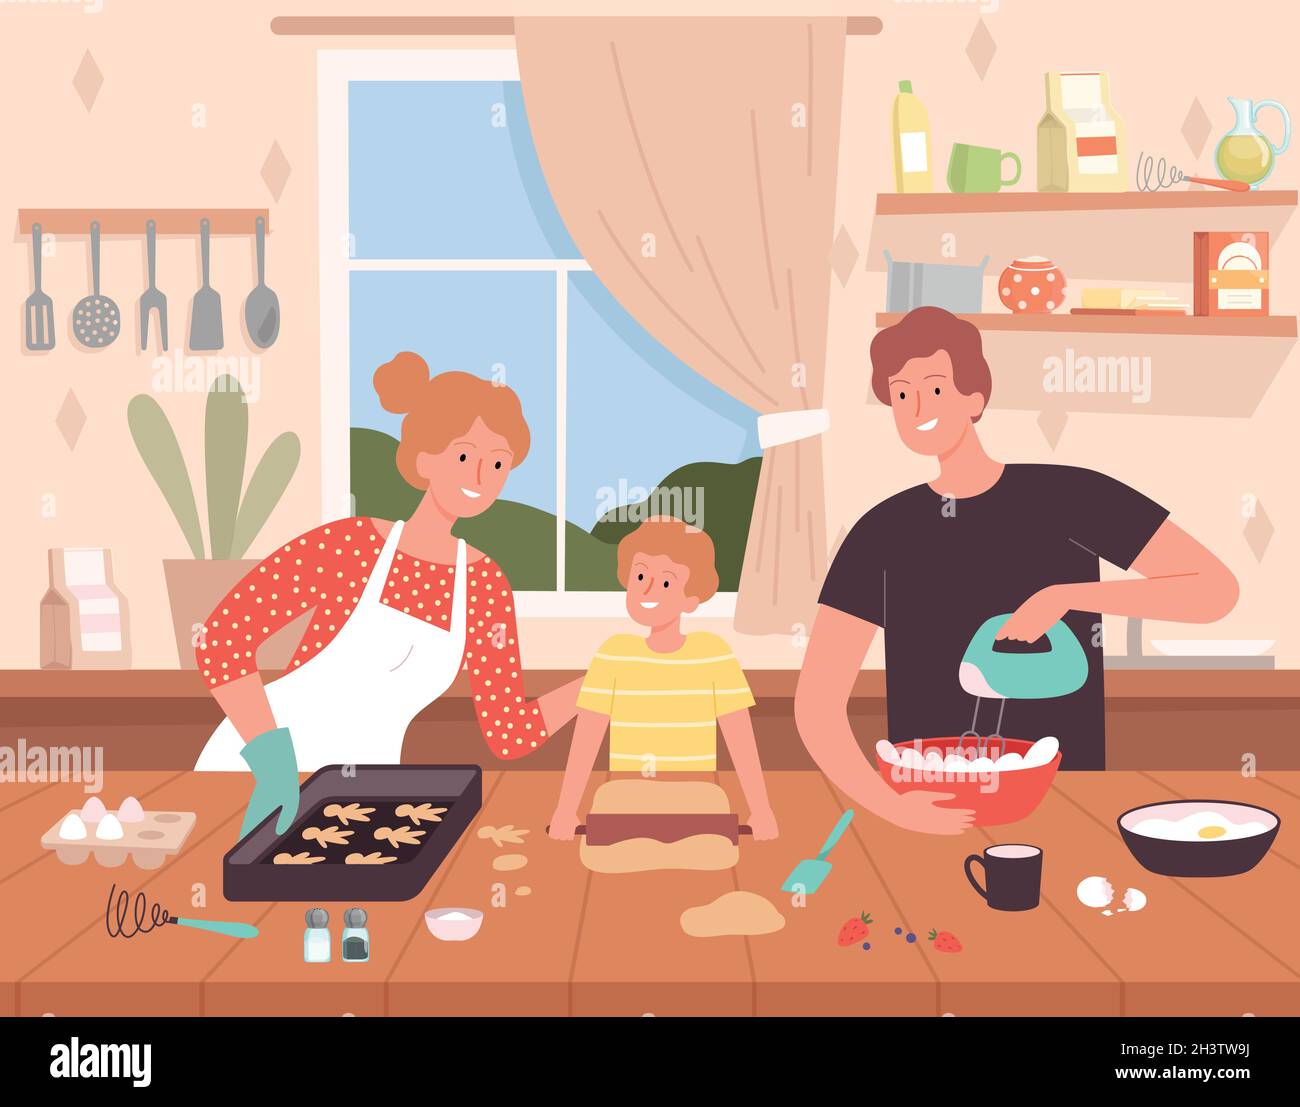 Preparing food on kitchen. Cartoon background with happy family characters making delicious products chef baking vector Stock Vector